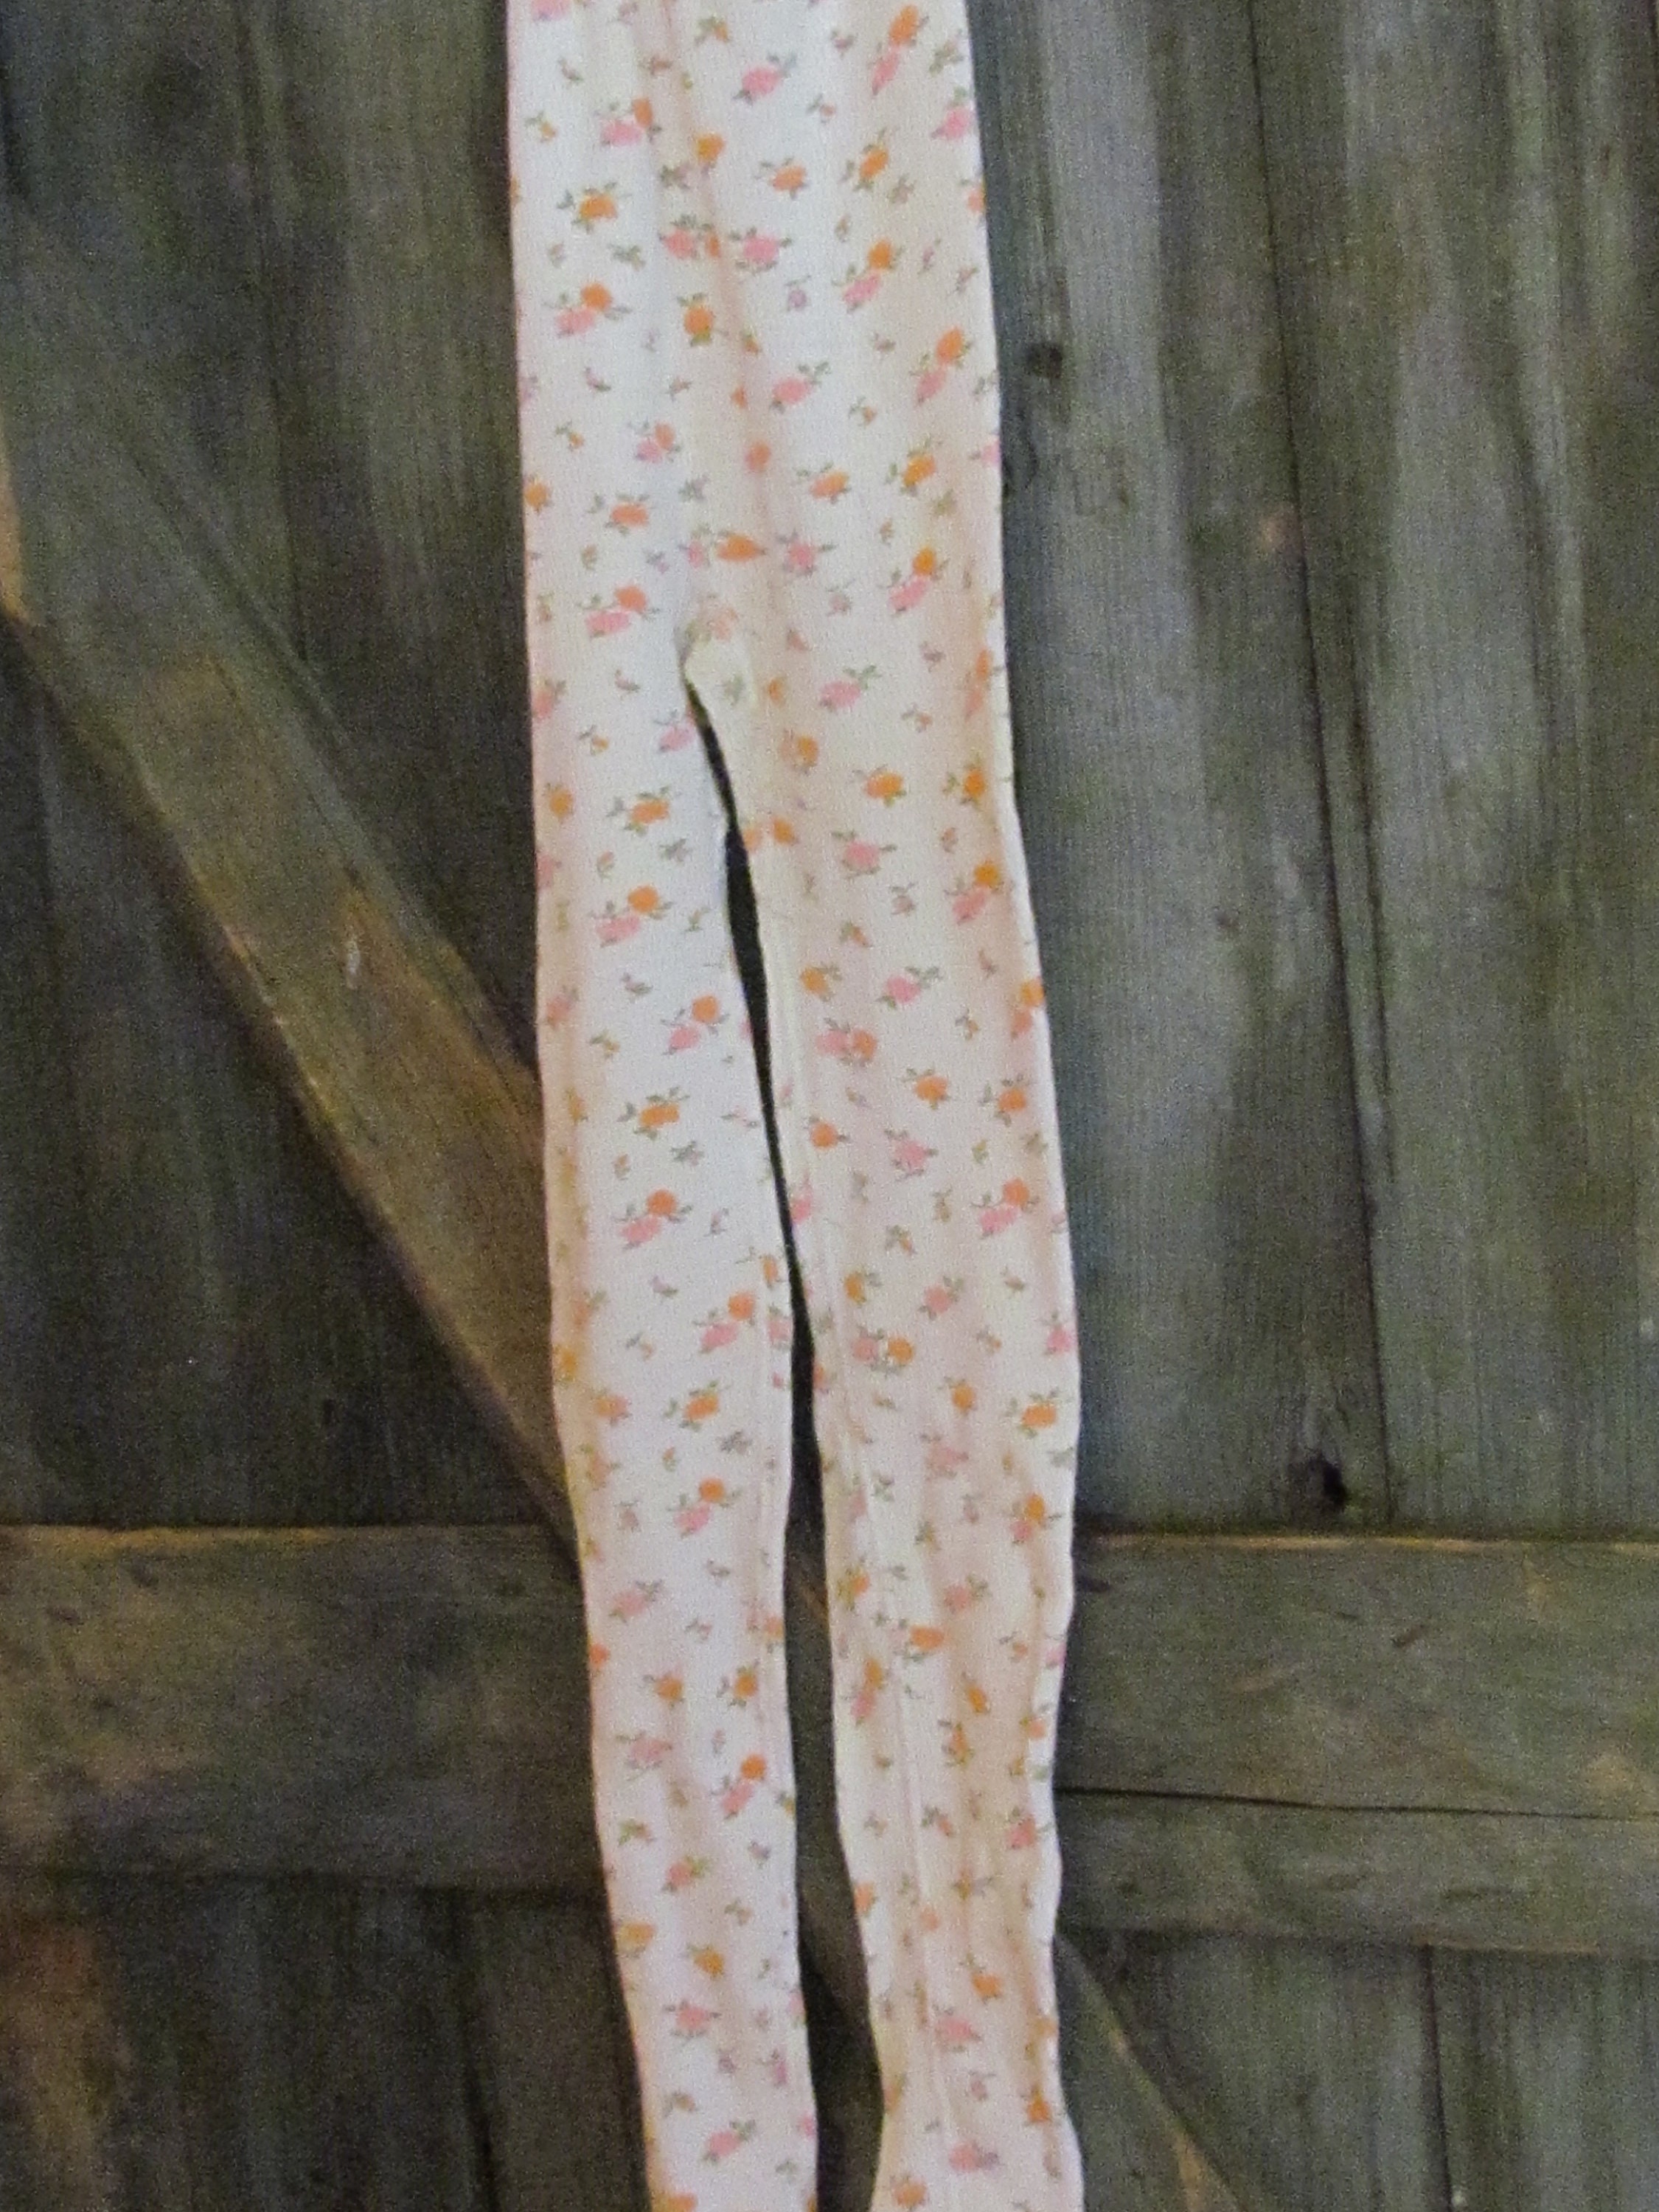 XS 70s / 80s Floral Thermal Pants / Duofold Cotton Lined 1970s